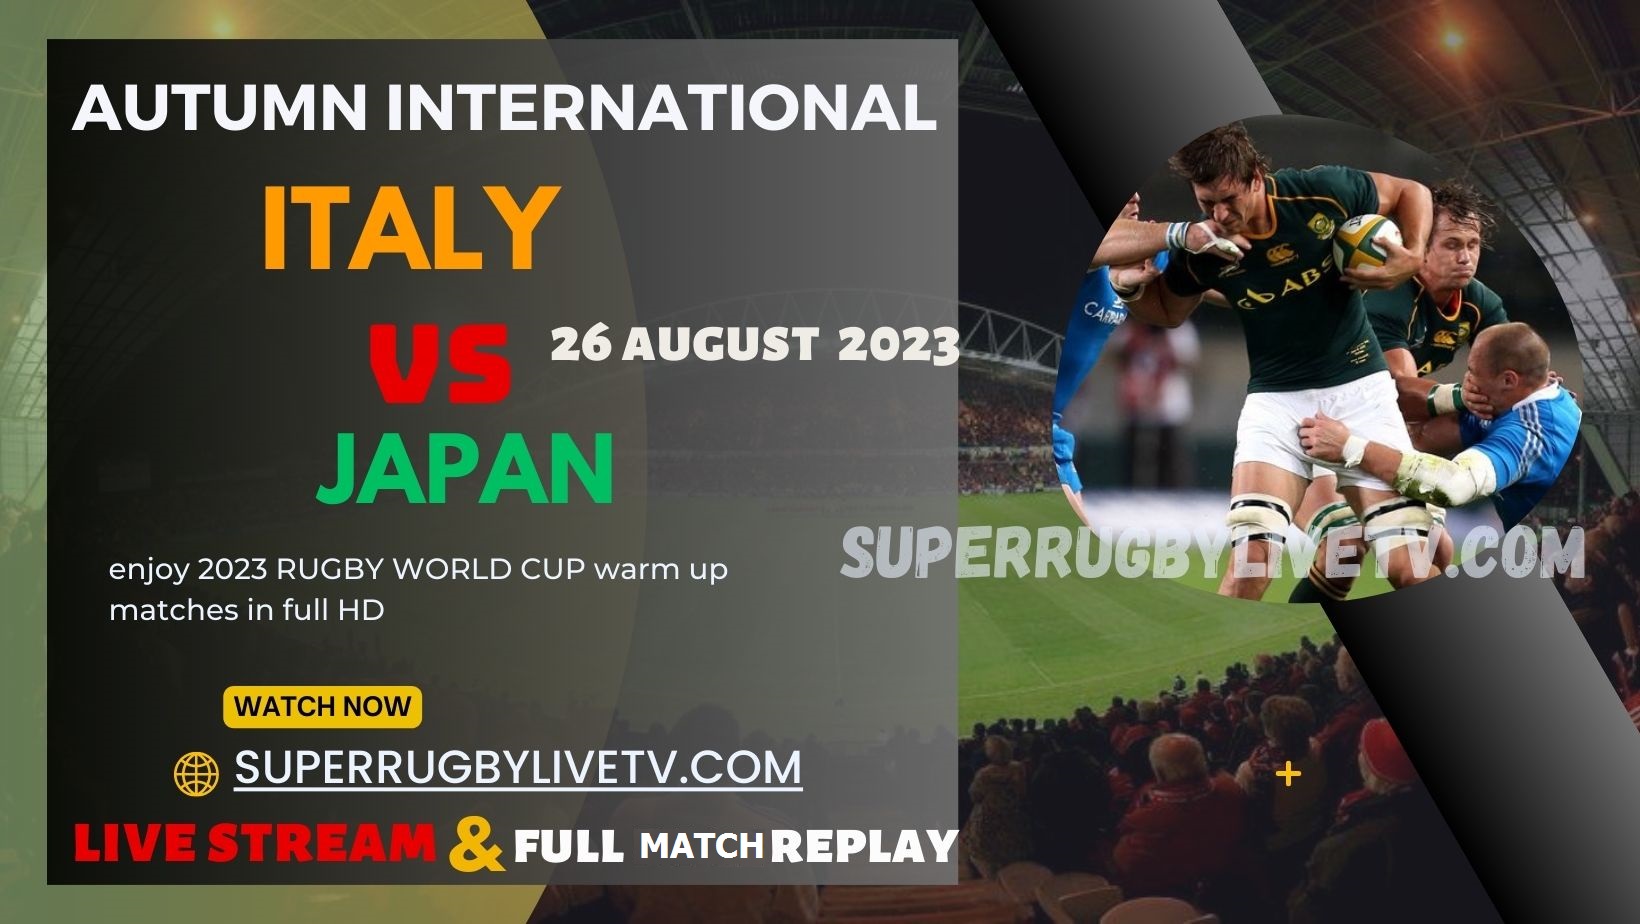 italy-vs-japan-autumn-international-rugby-live-stream